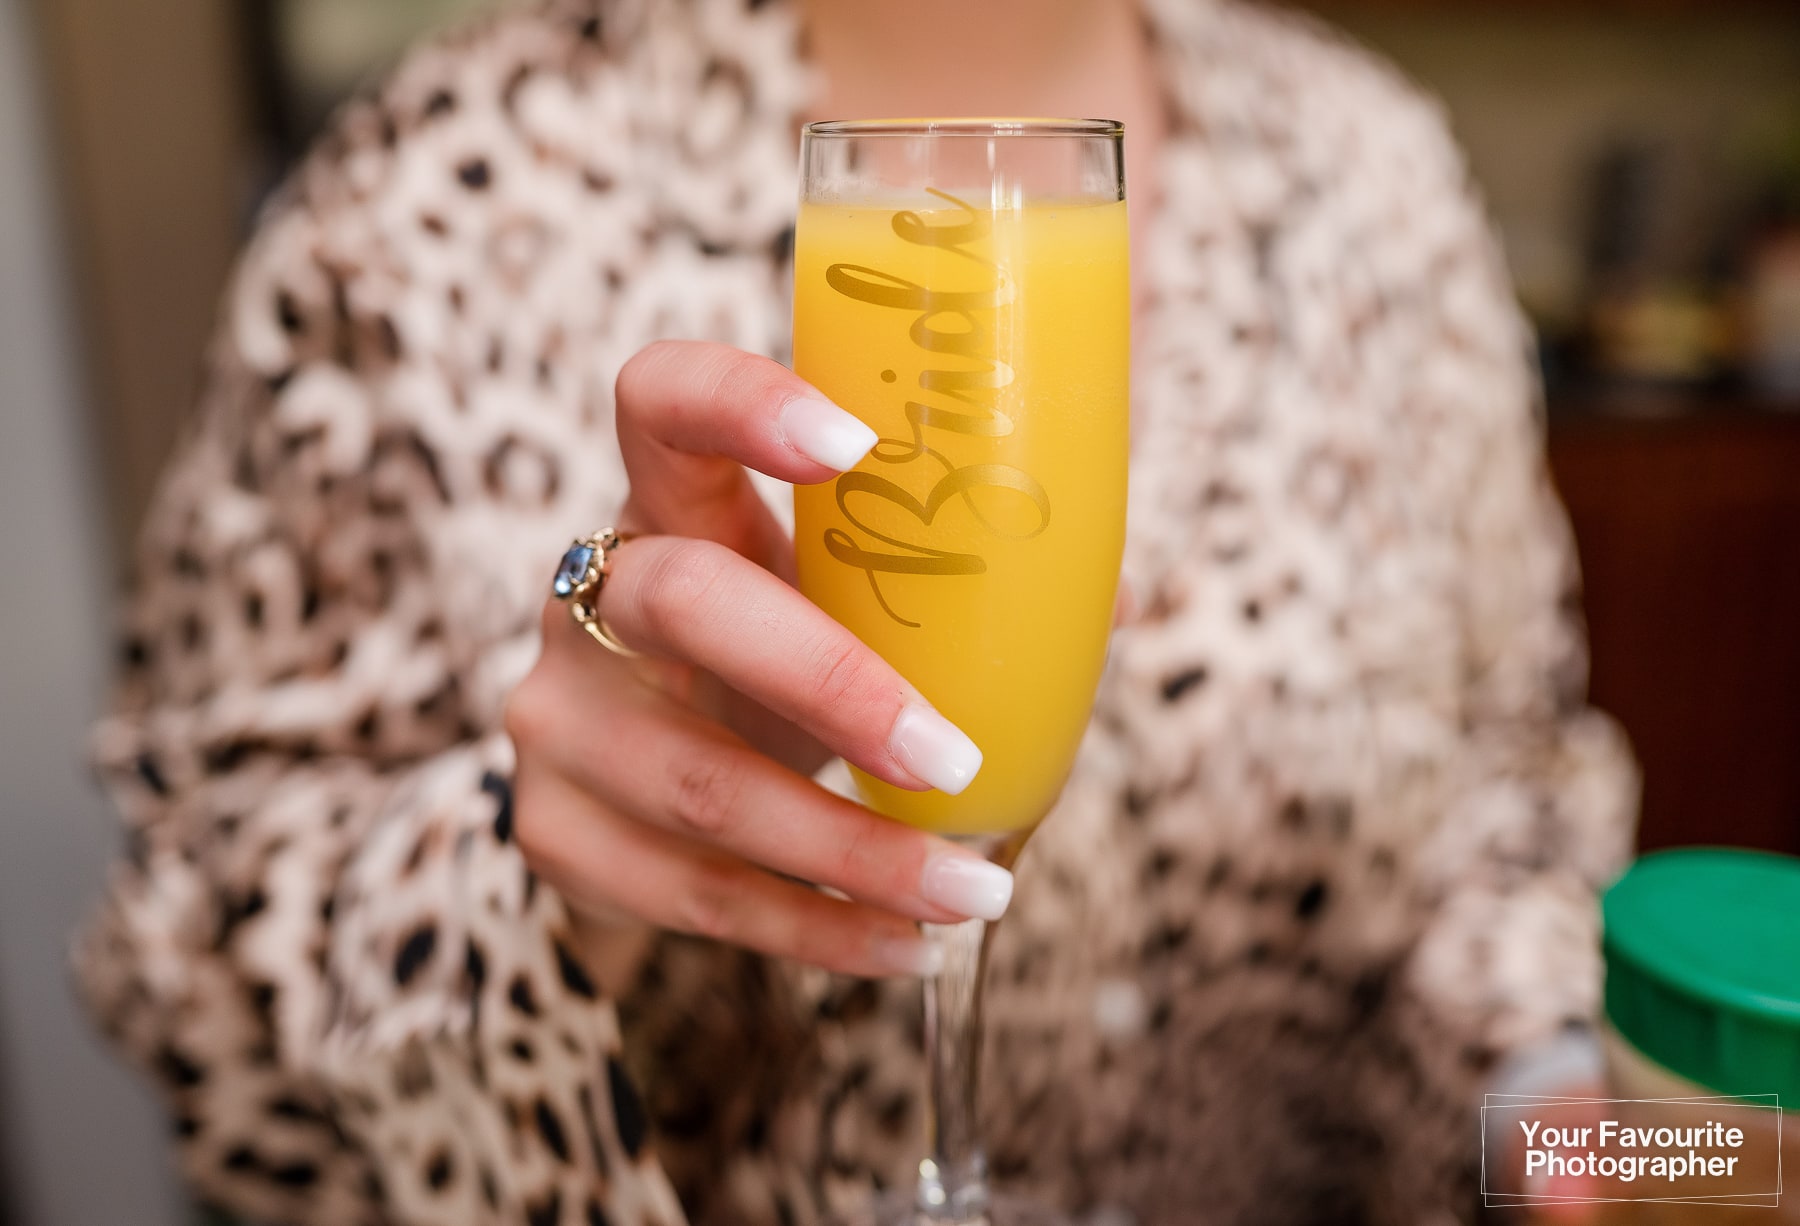 "Bride" glass containing mimosa